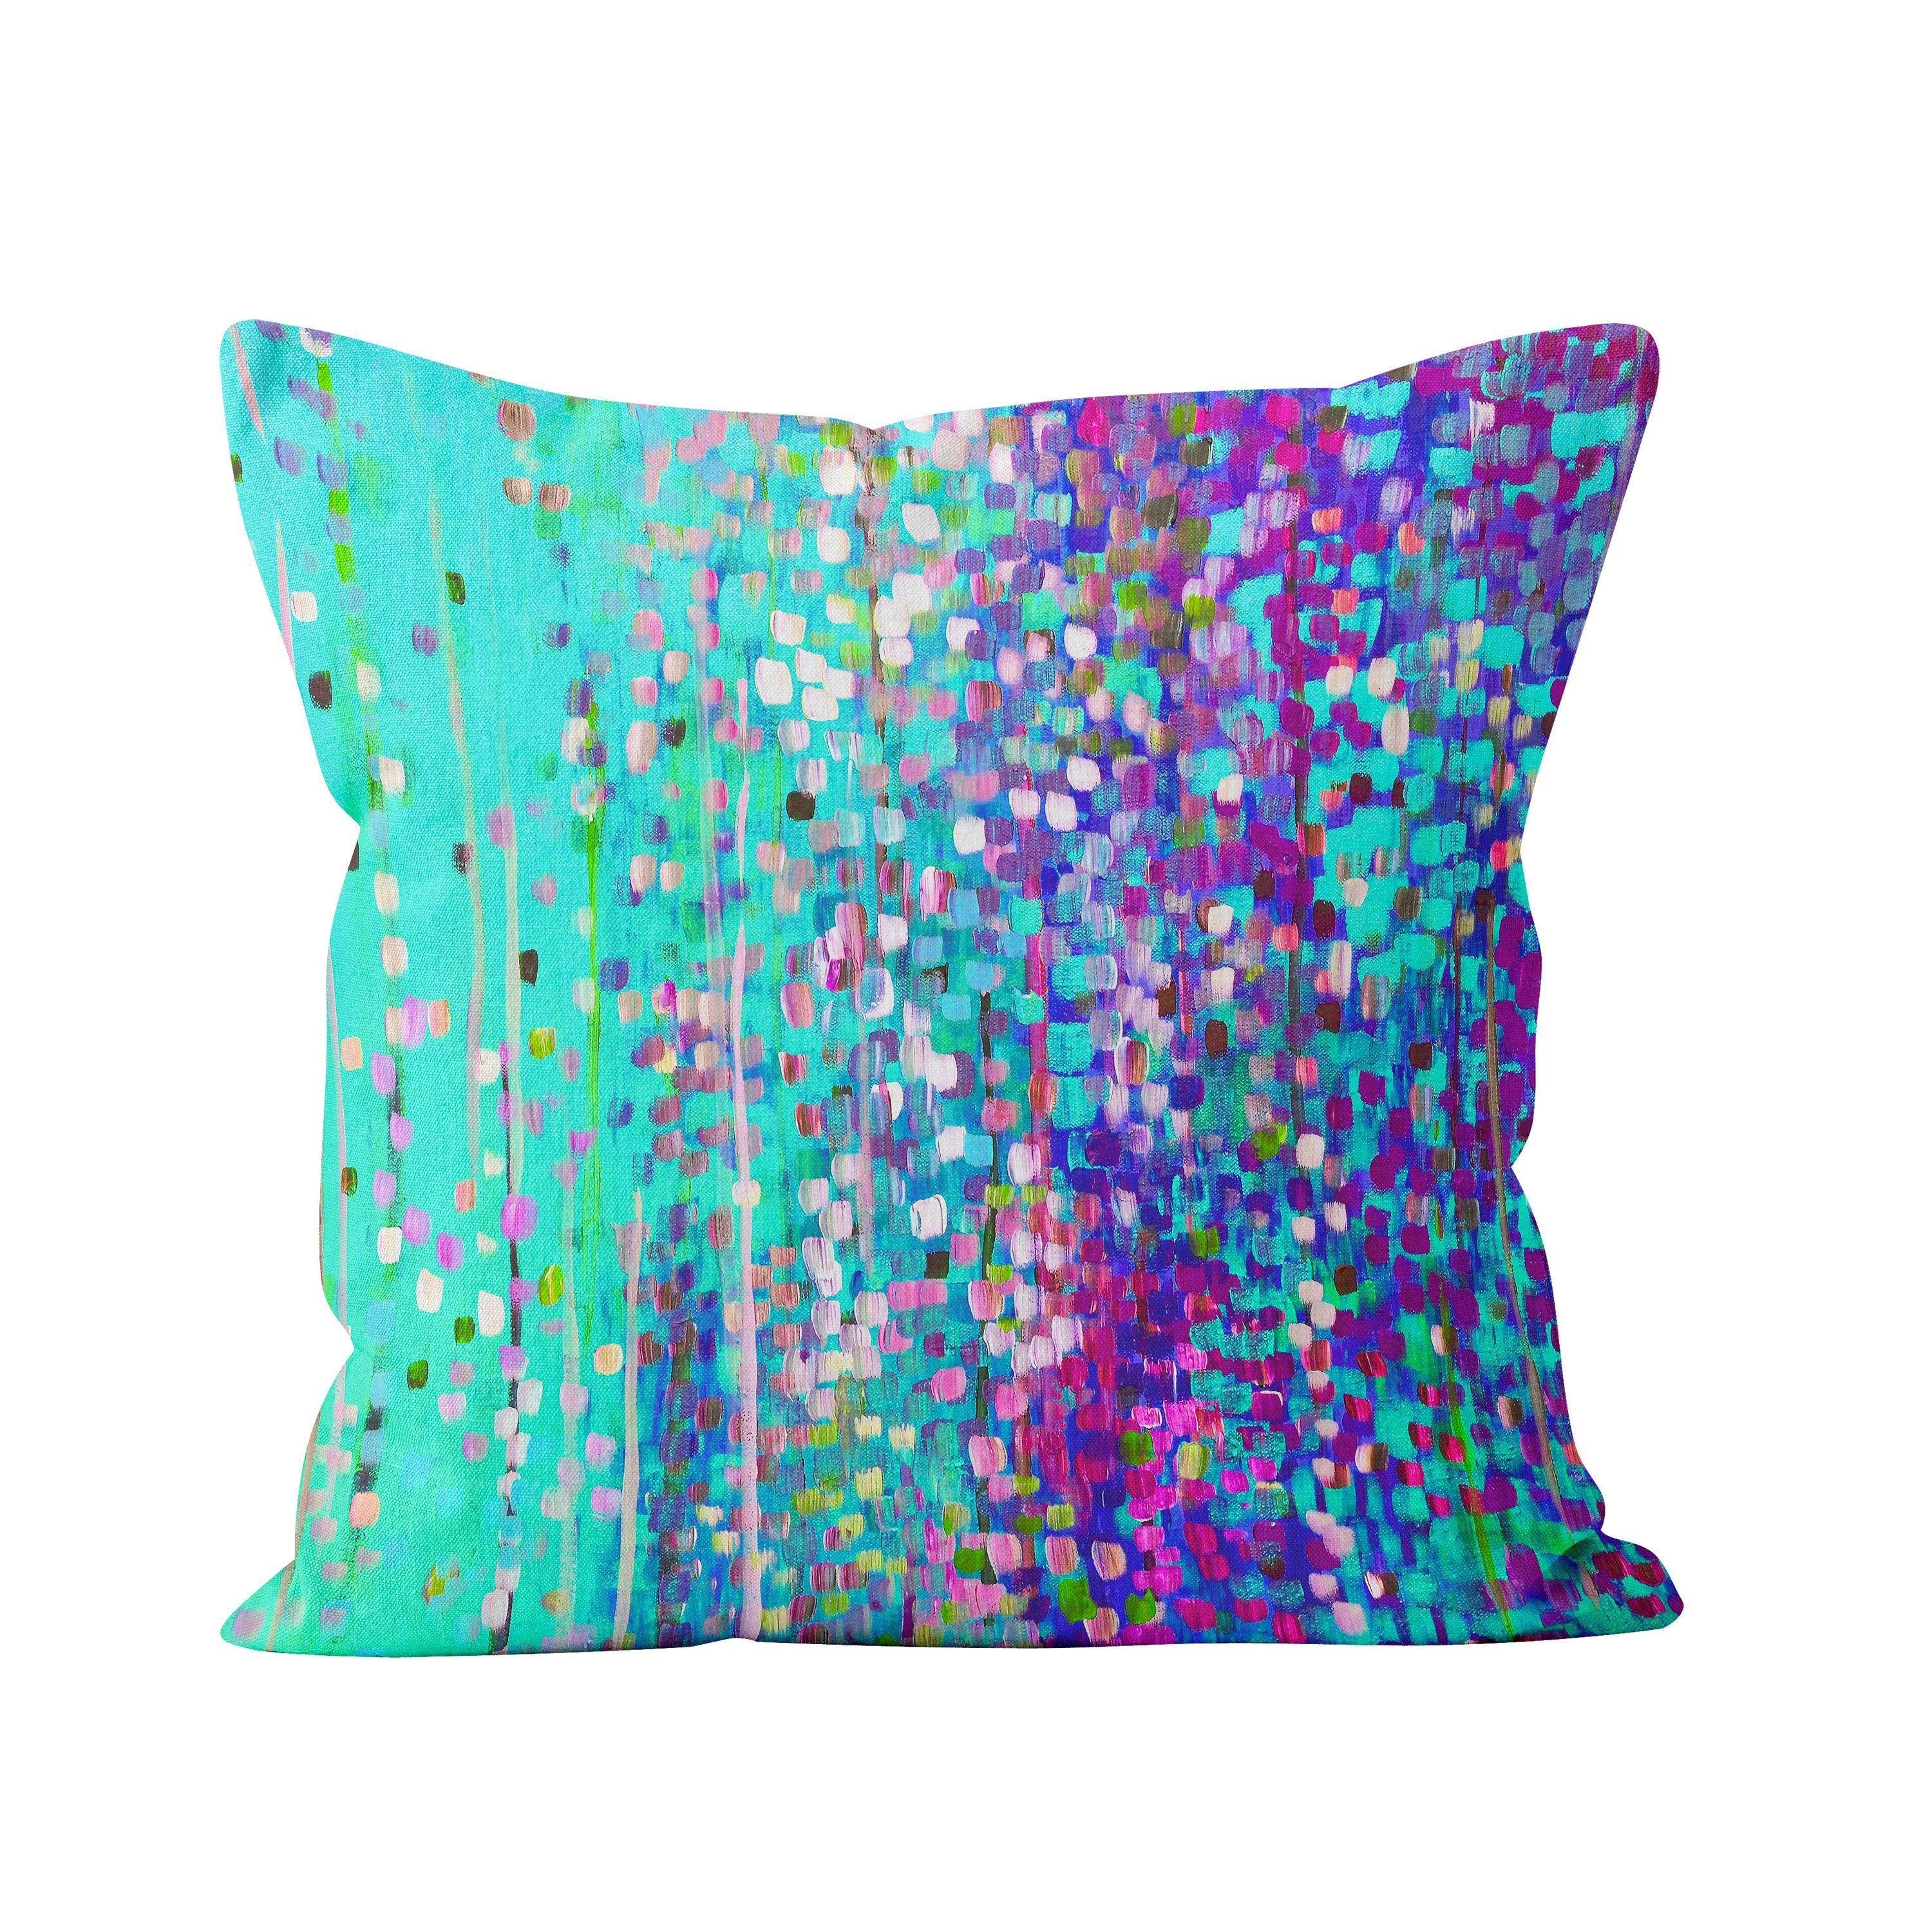 Turquoise & Purple Abstract Cushion - Louise Mead